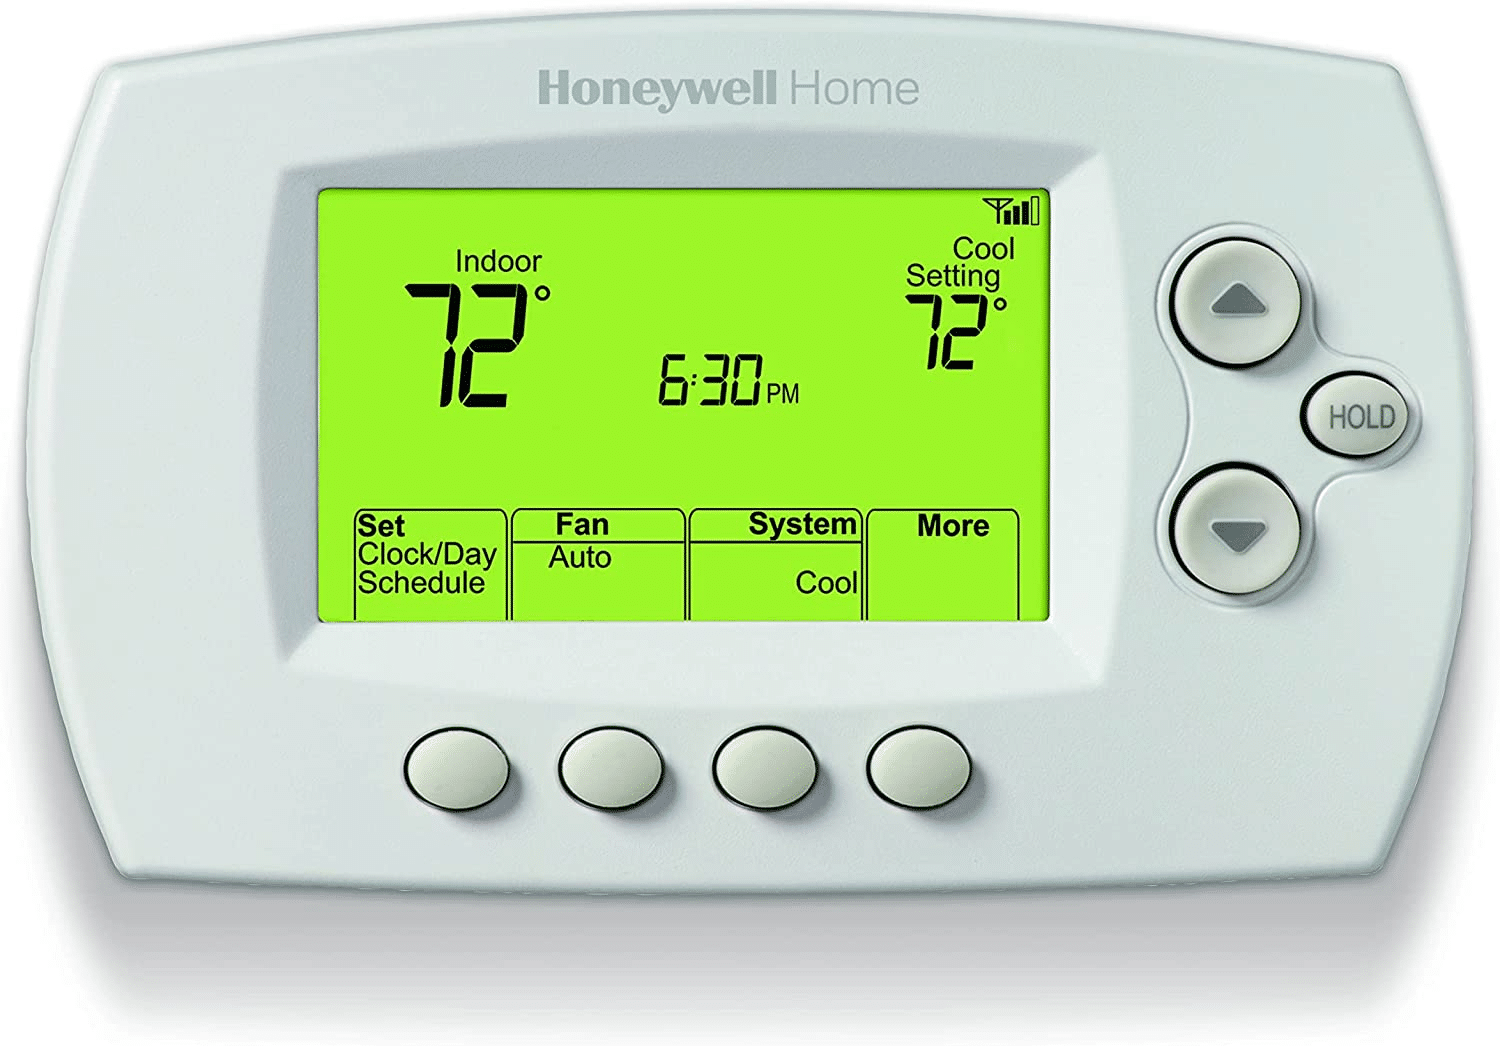 Why Does My Thermostat Have Batteries?